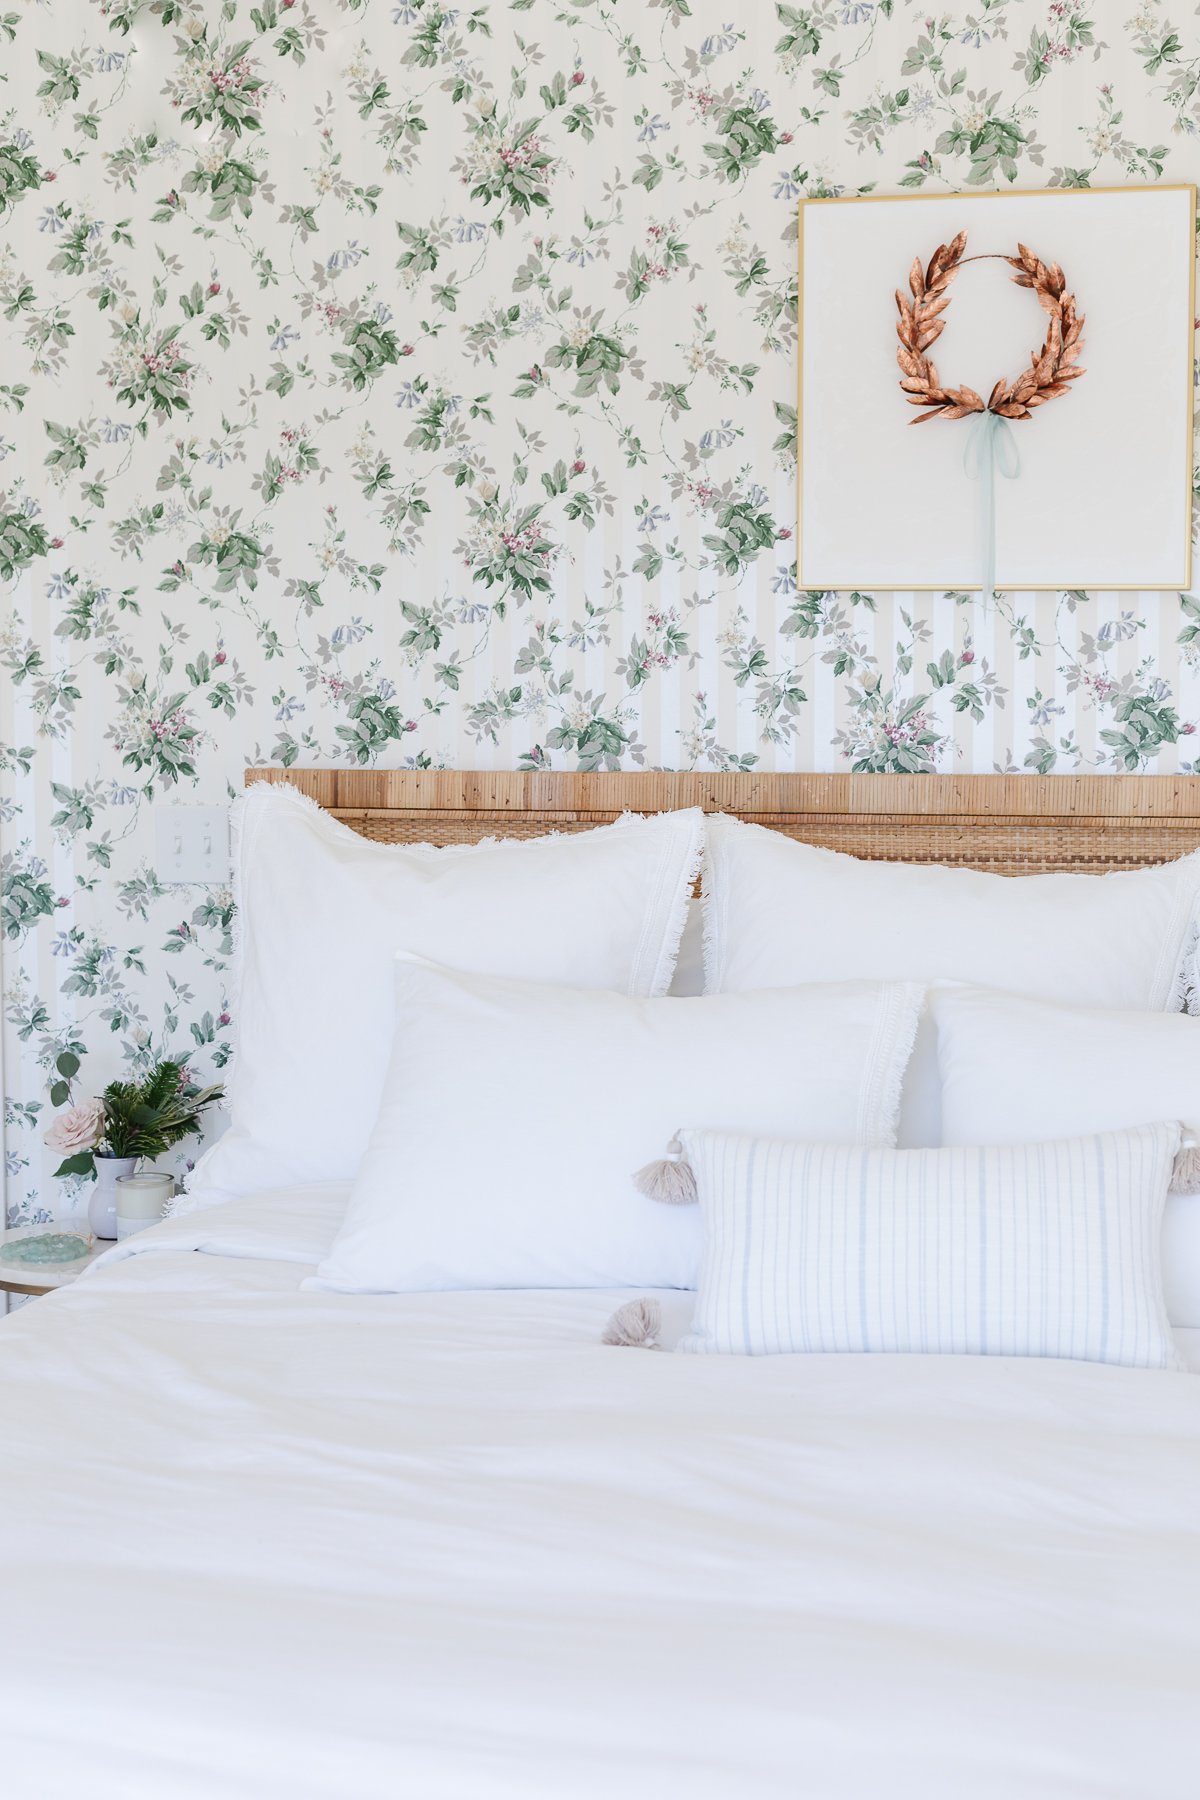 A white bed in a bedroom that has floral wallpaper, with a gold laurel wreath hanging over the white art above.